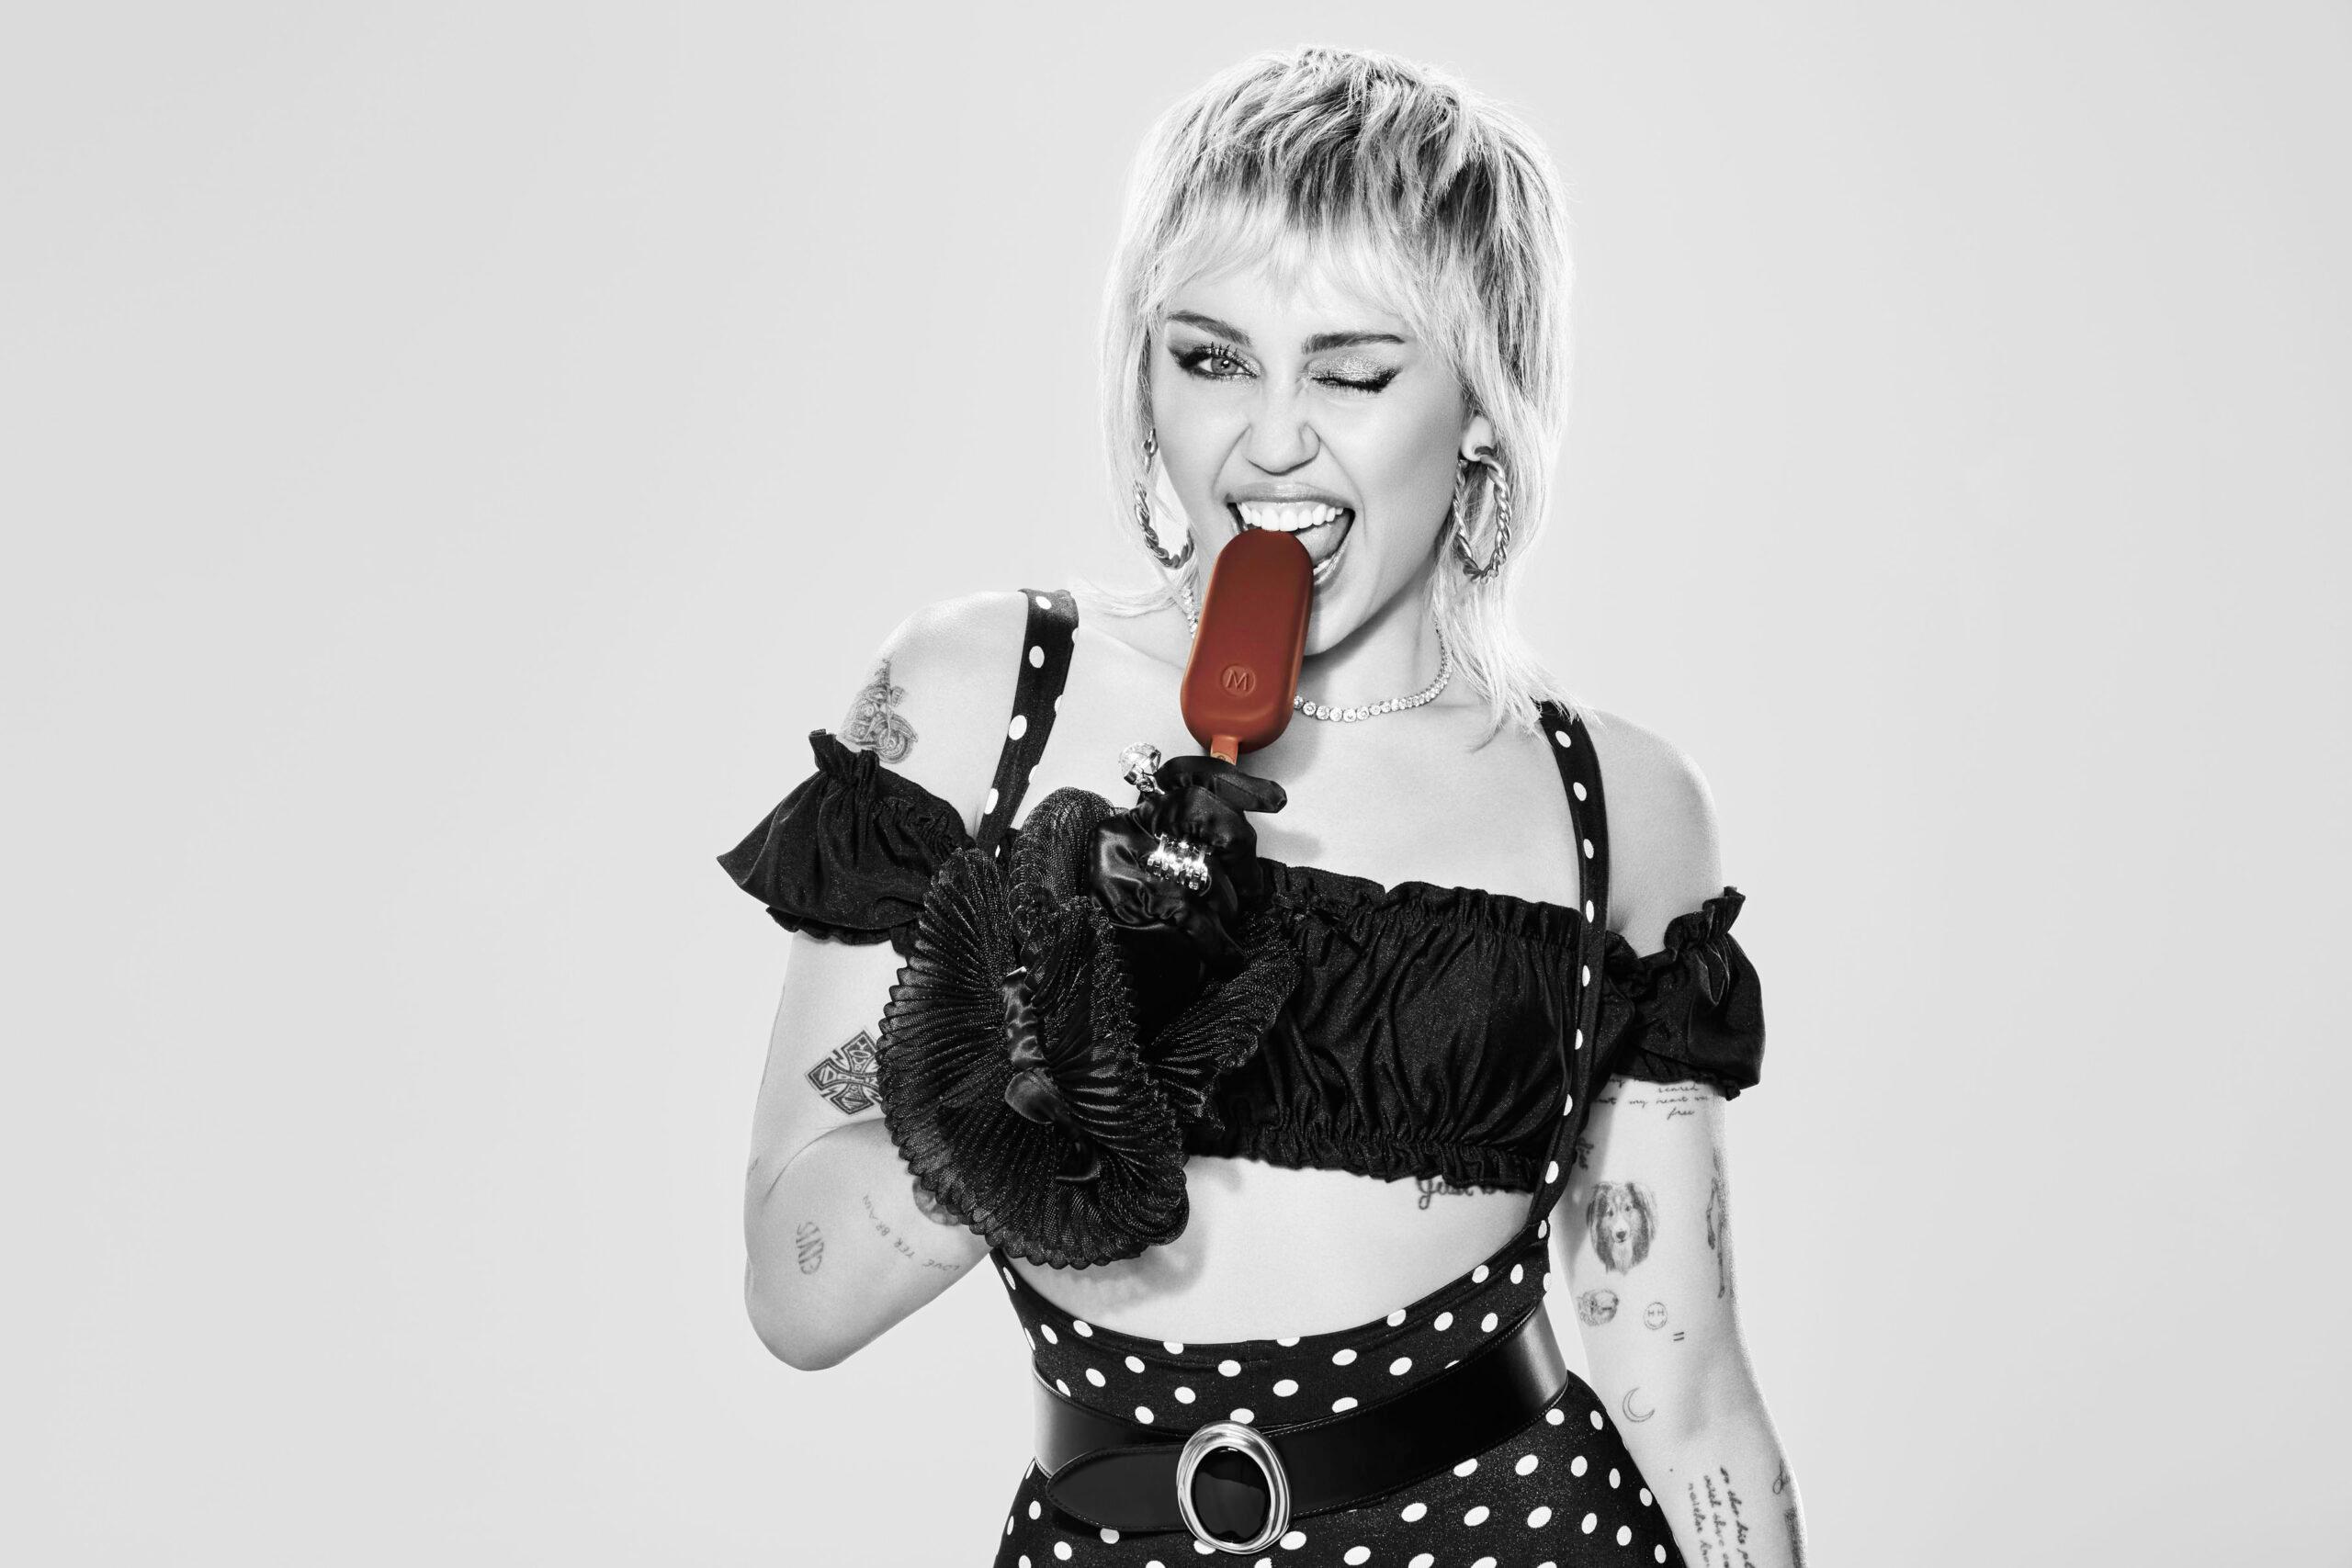 Miley Cyrus urges fans to ShowYourLayers in collaboration with Magnum ice cream